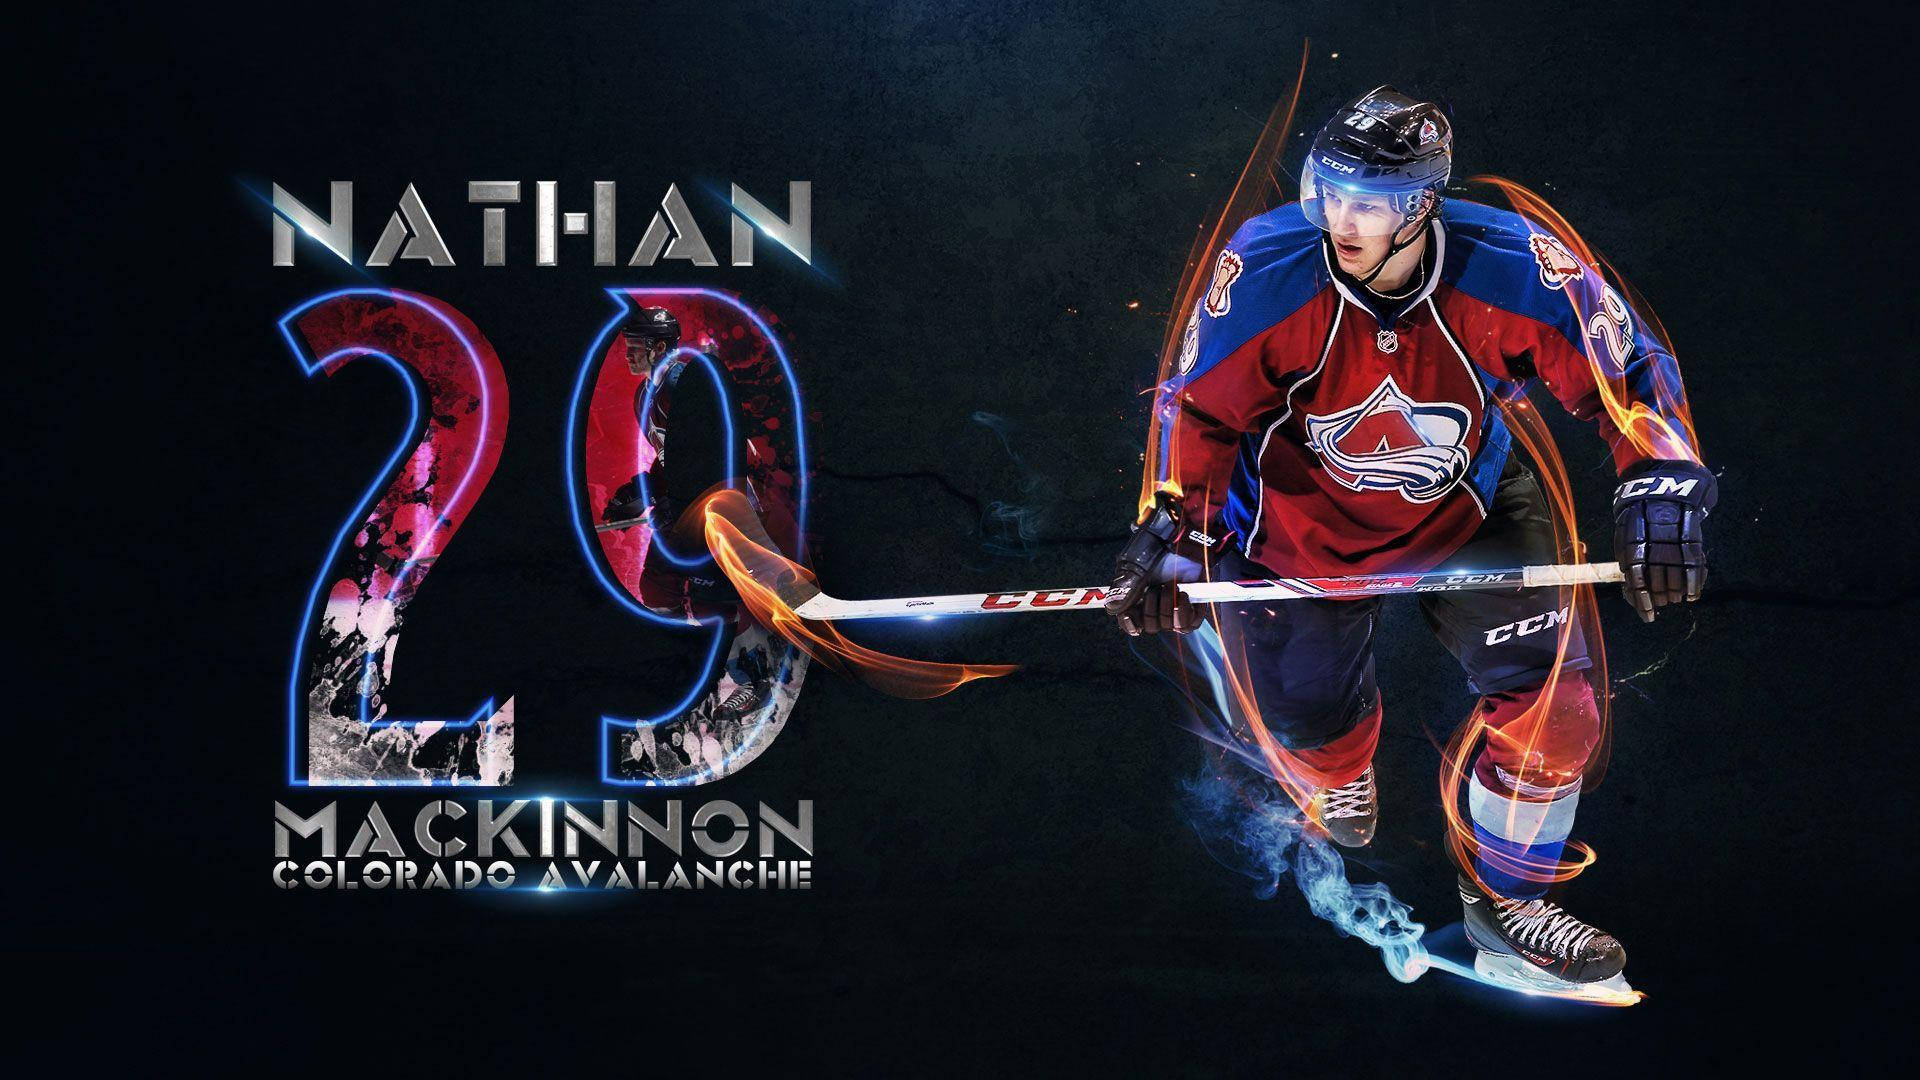 1920X1080 Colorado Avalanche Wallpaper and Background